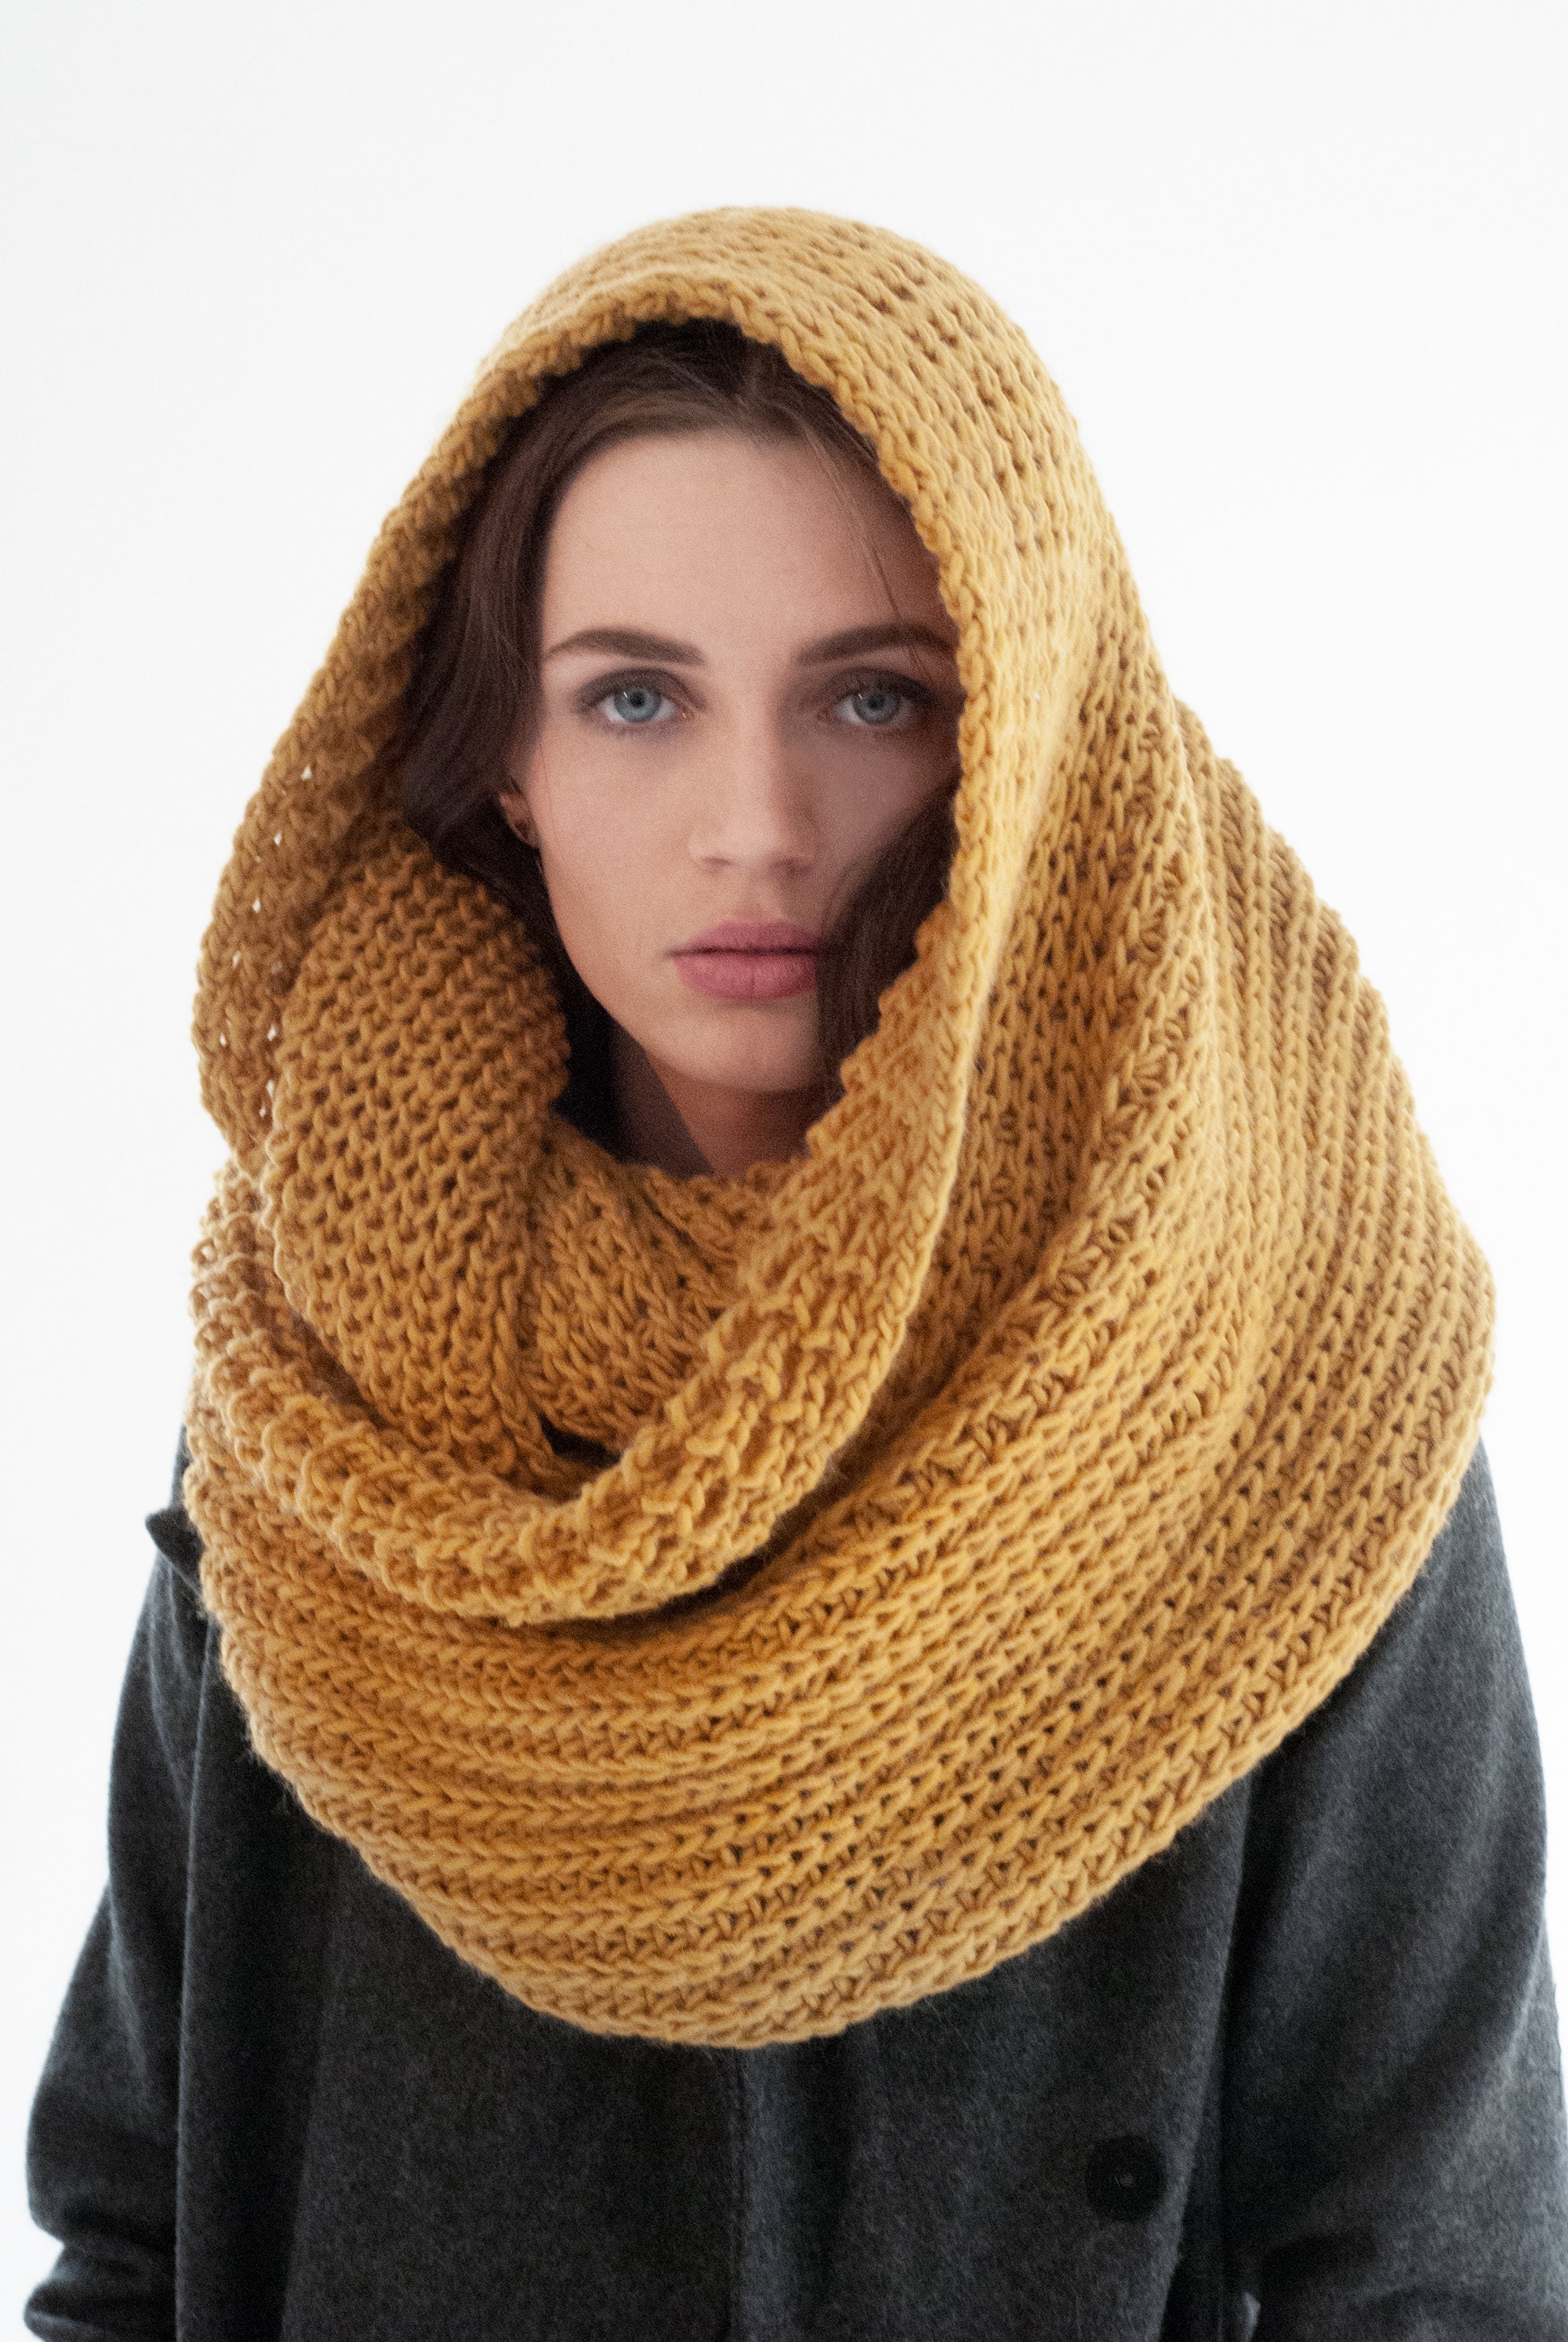 Buy Infinity Scarf, Chunky Knit Scarf, Winter Shawl, Loop Scarf, Winter  Scarf, London Infinity Scarf, Marcella MA0402 Online in India 